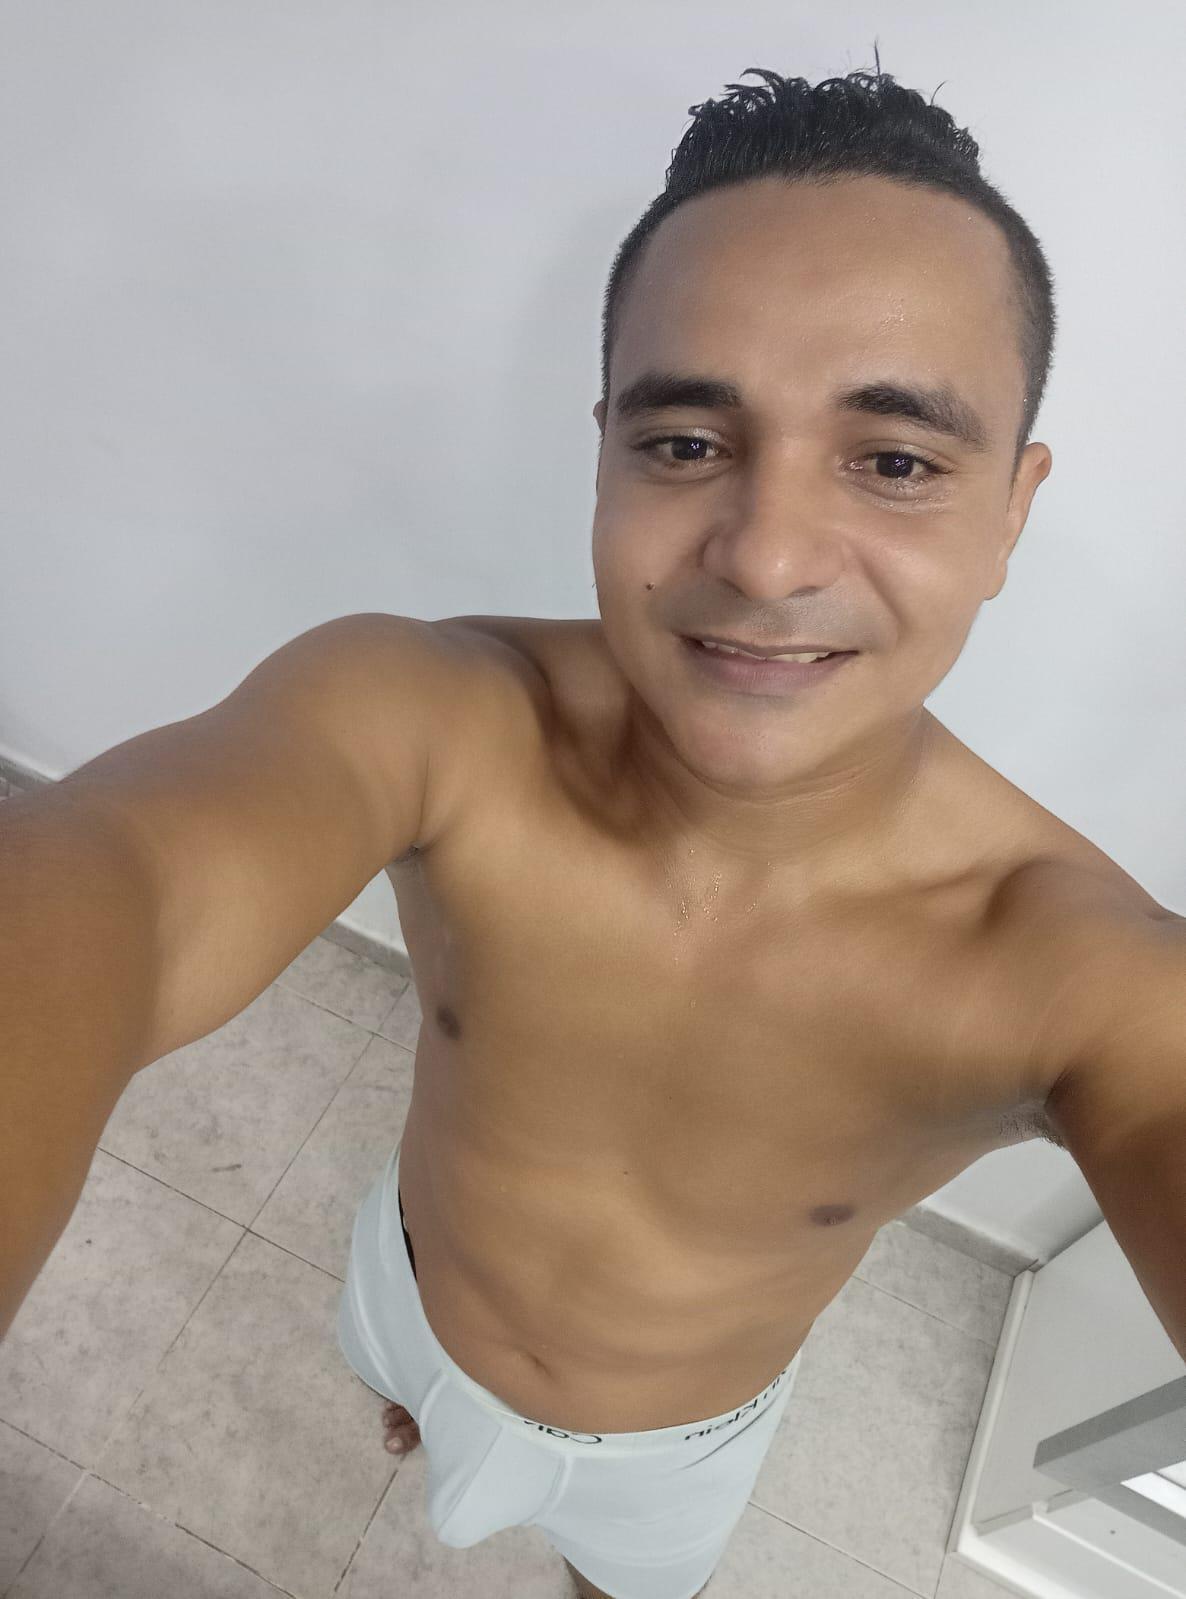 andres11295786 live cam on Cam4